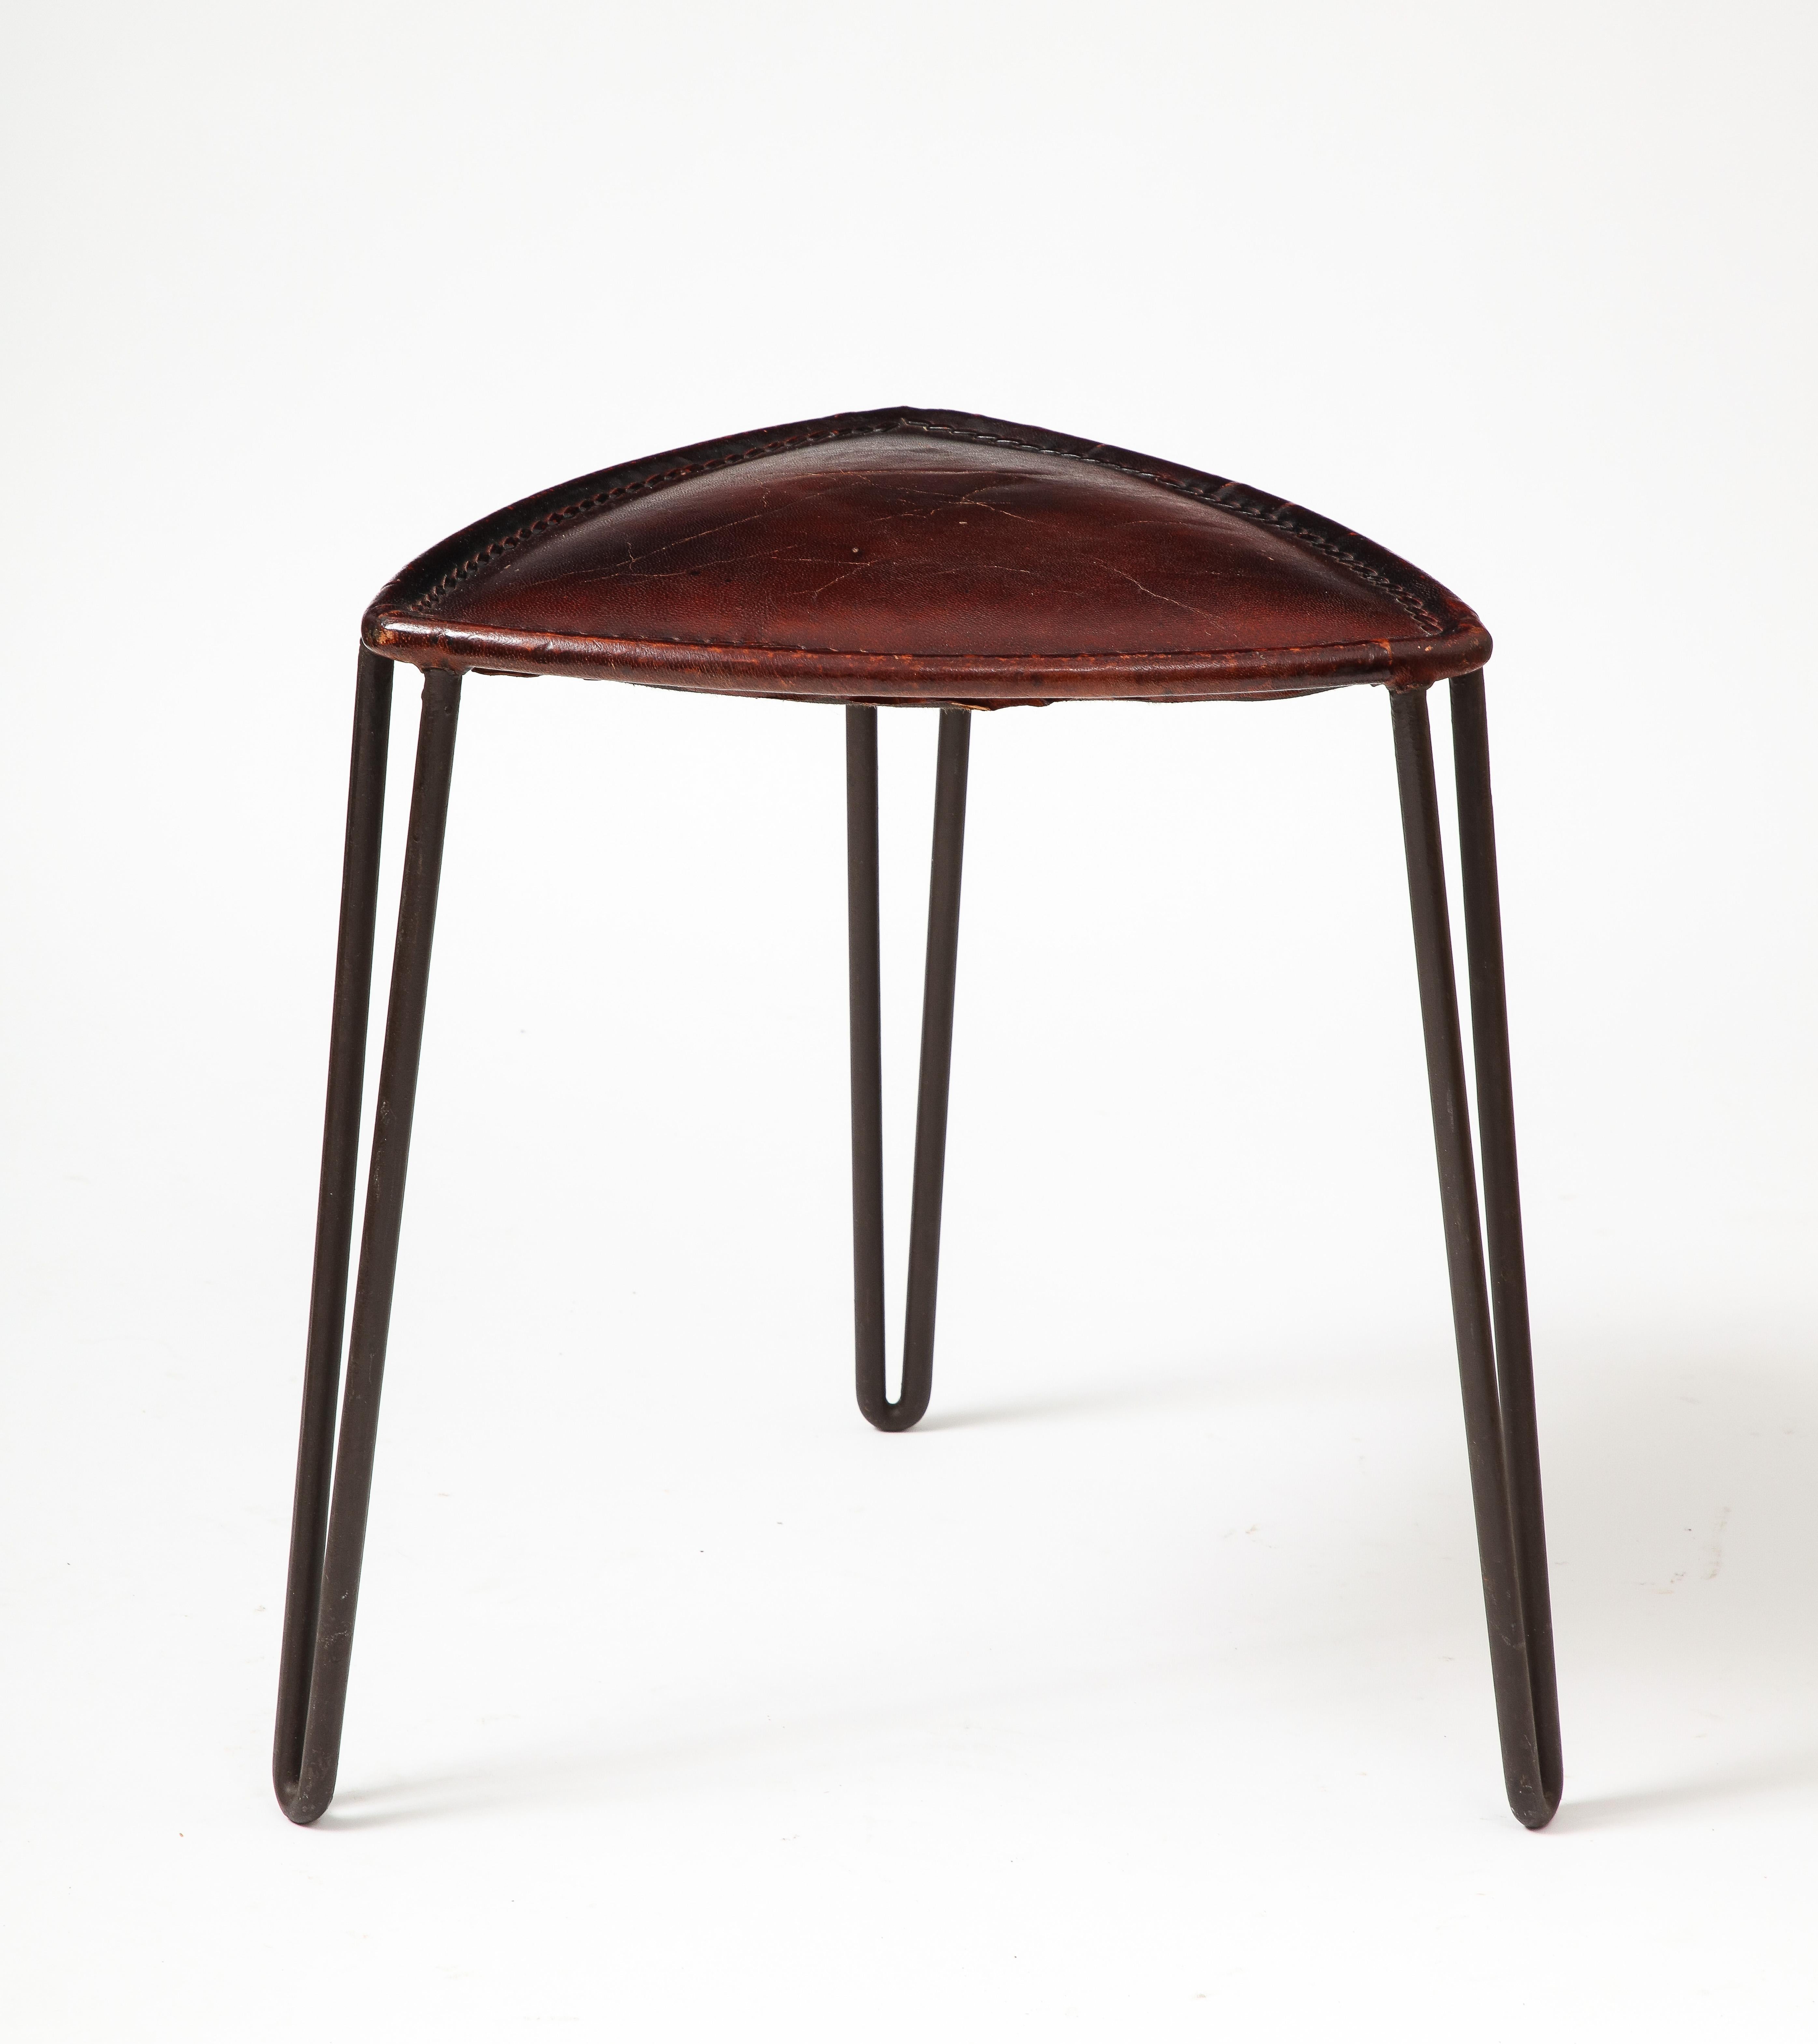 Steel Leather and Metal Stool, France, c. 1950 For Sale